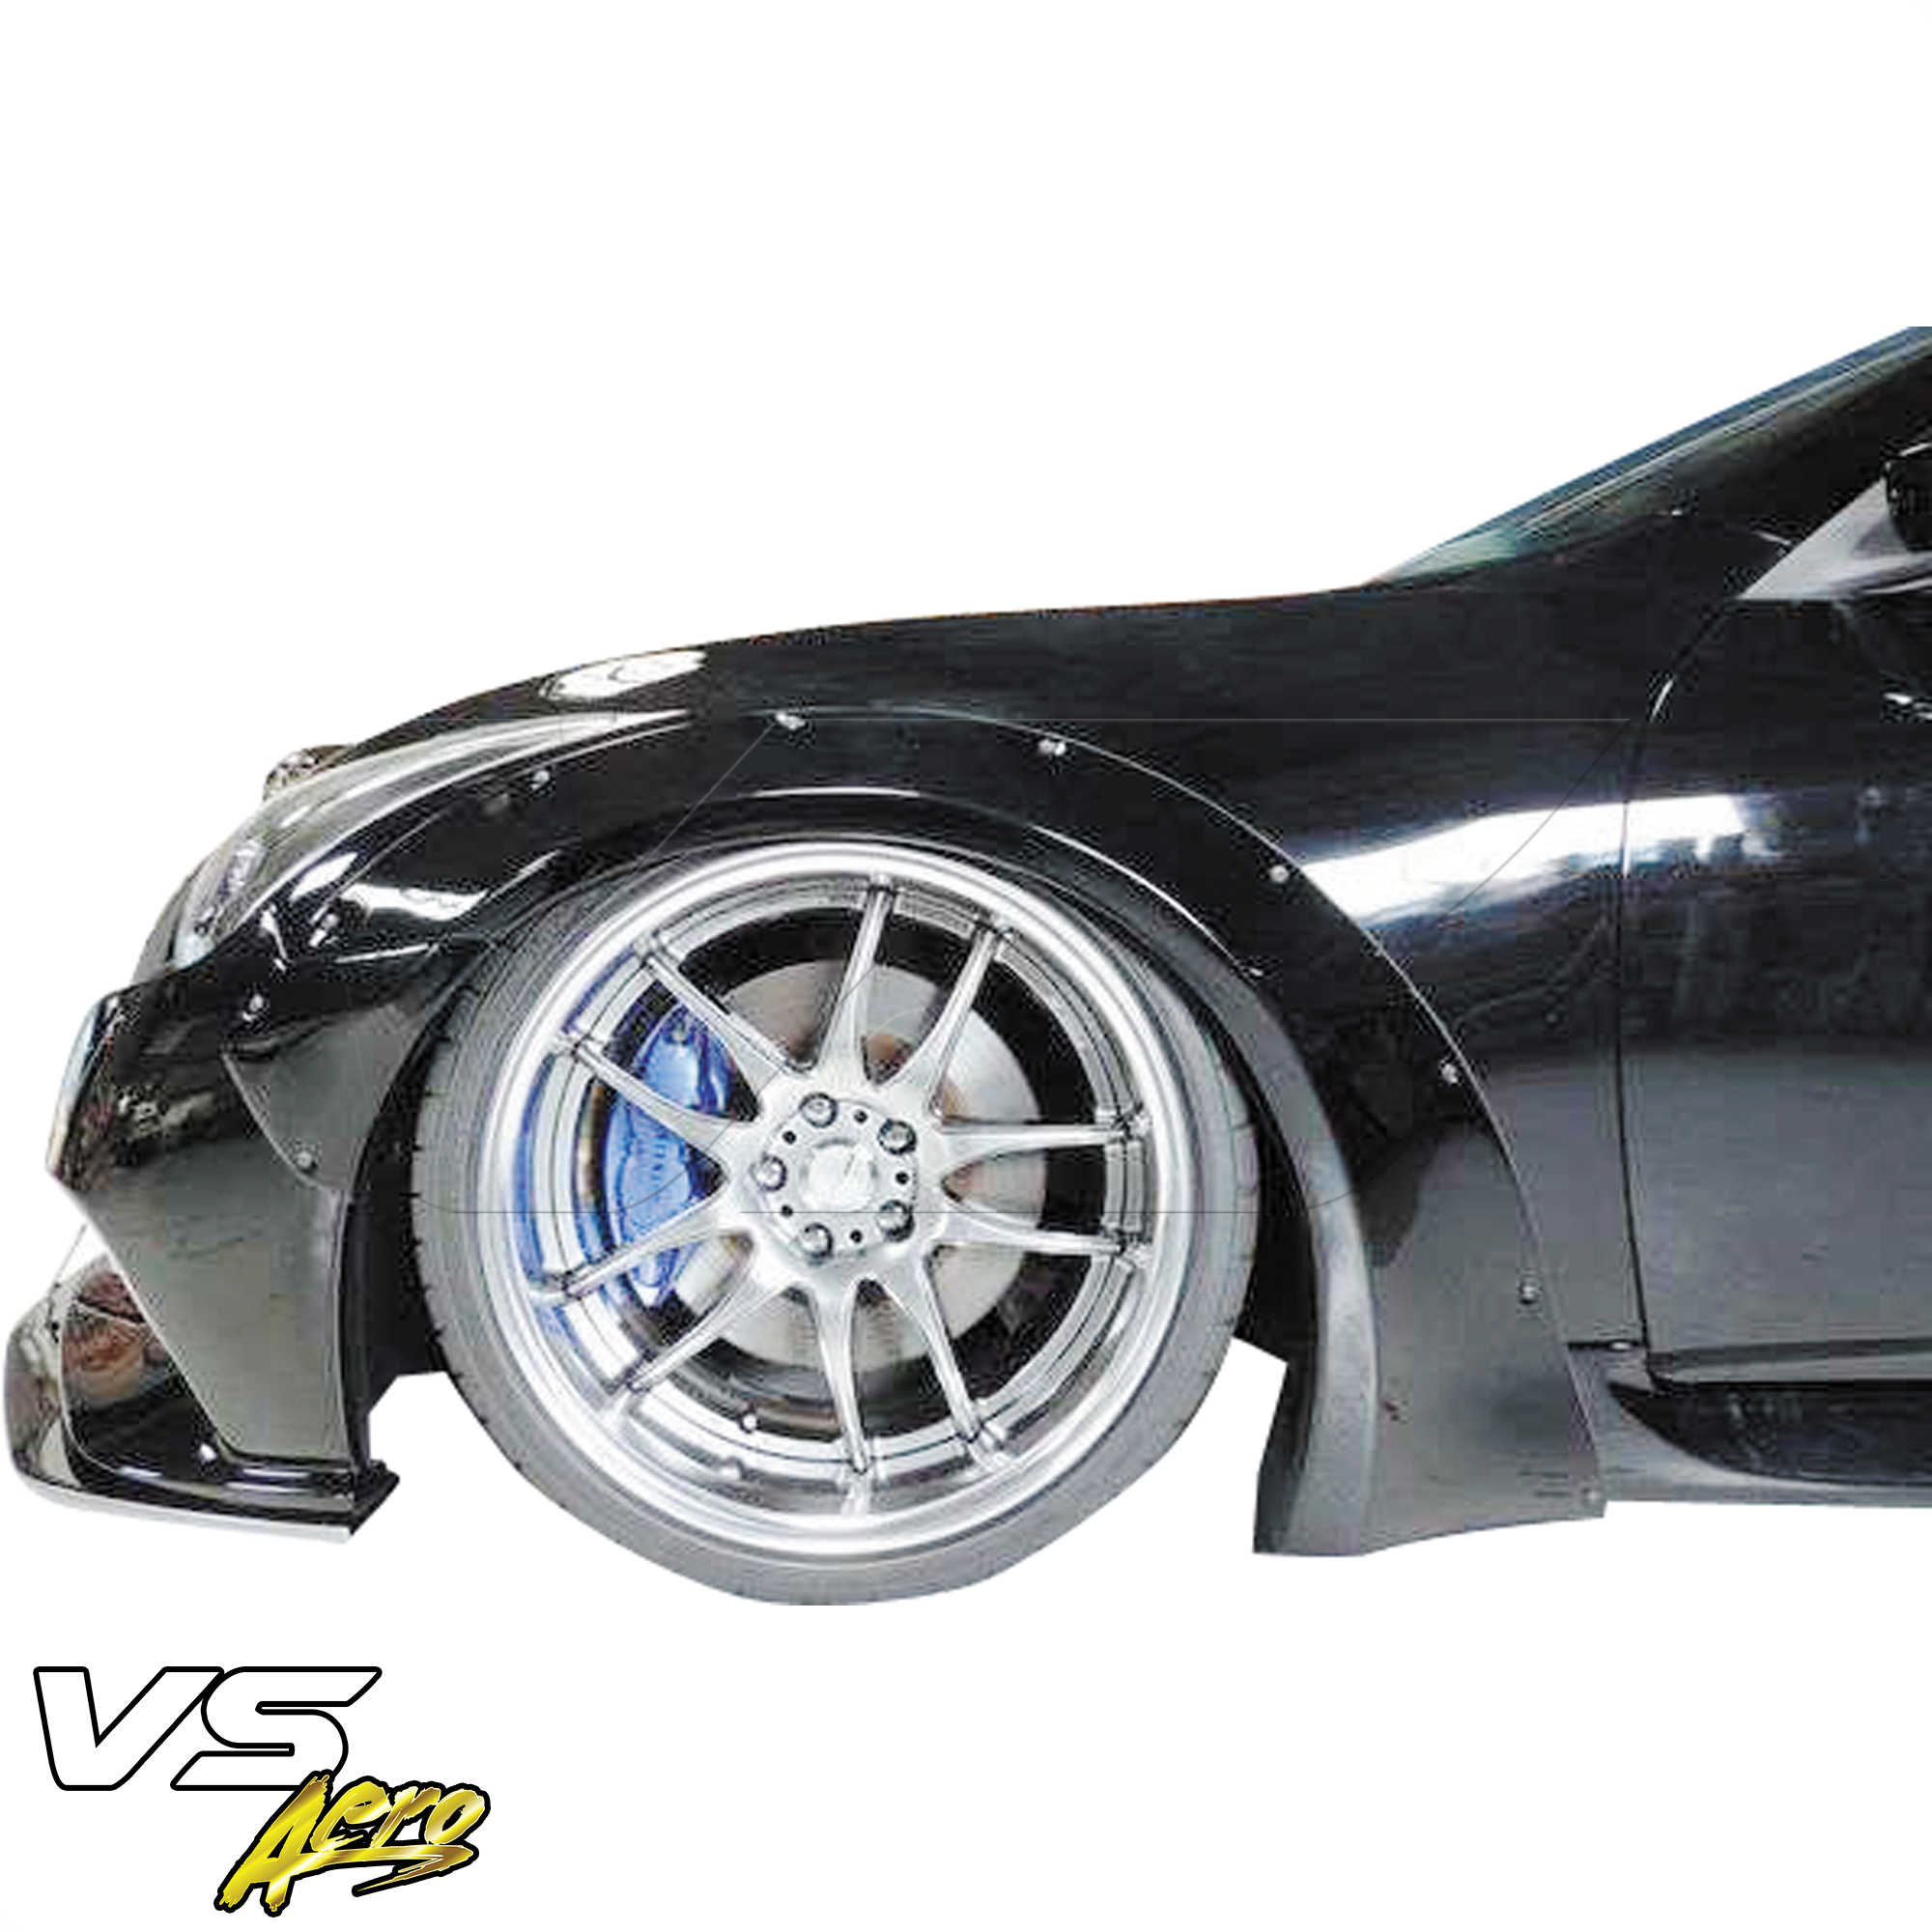 VSaero FRP LBPE Wide Body Fender Flares (front) 4pc > Infiniti G37 Coupe 2008-2015 > 2dr Coupe - Image 41